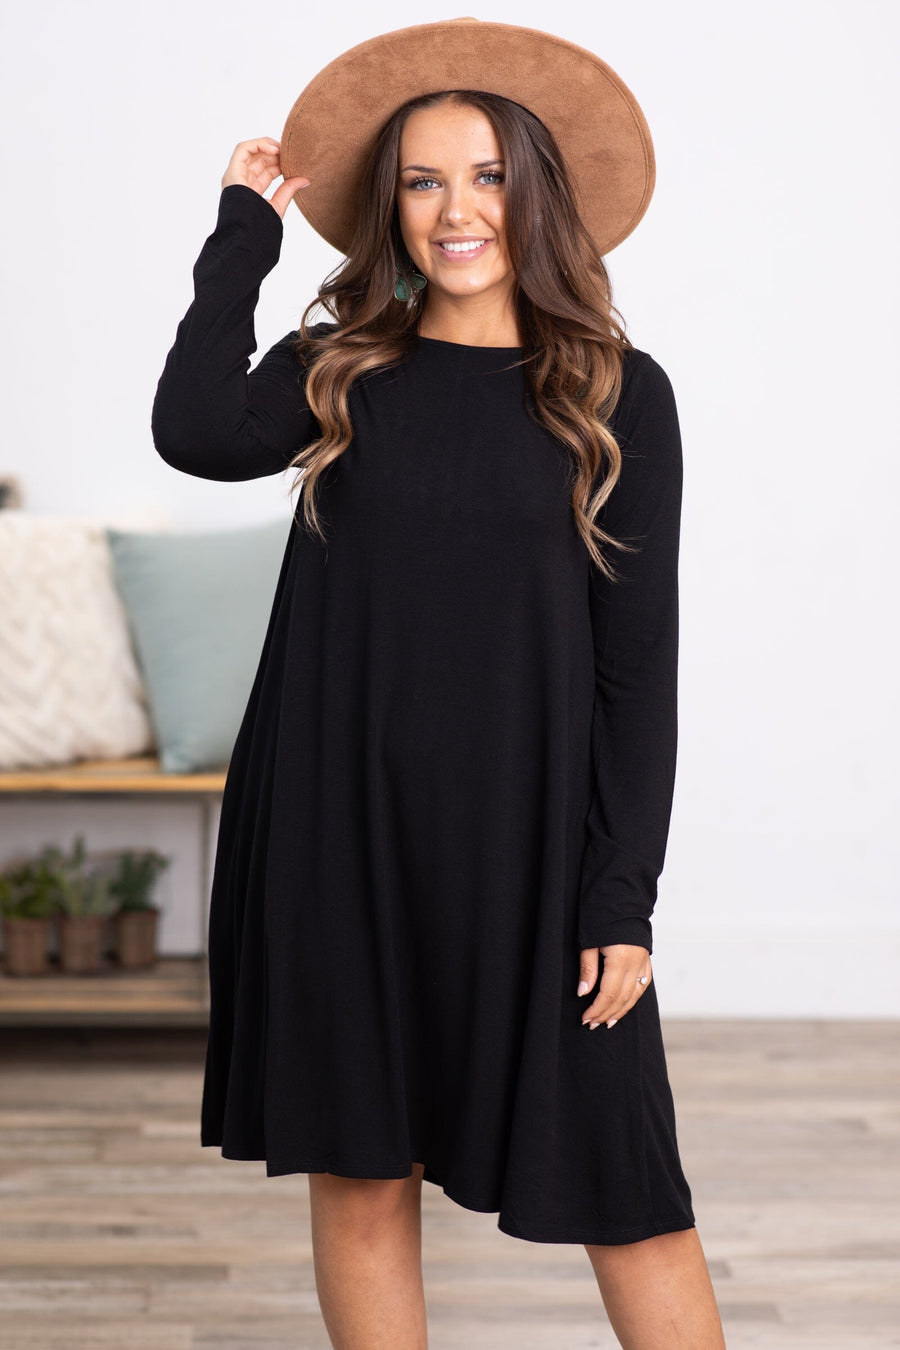 Zenana Dresses  Shop Maxi, Tiered & More at Filly Flair Boutique